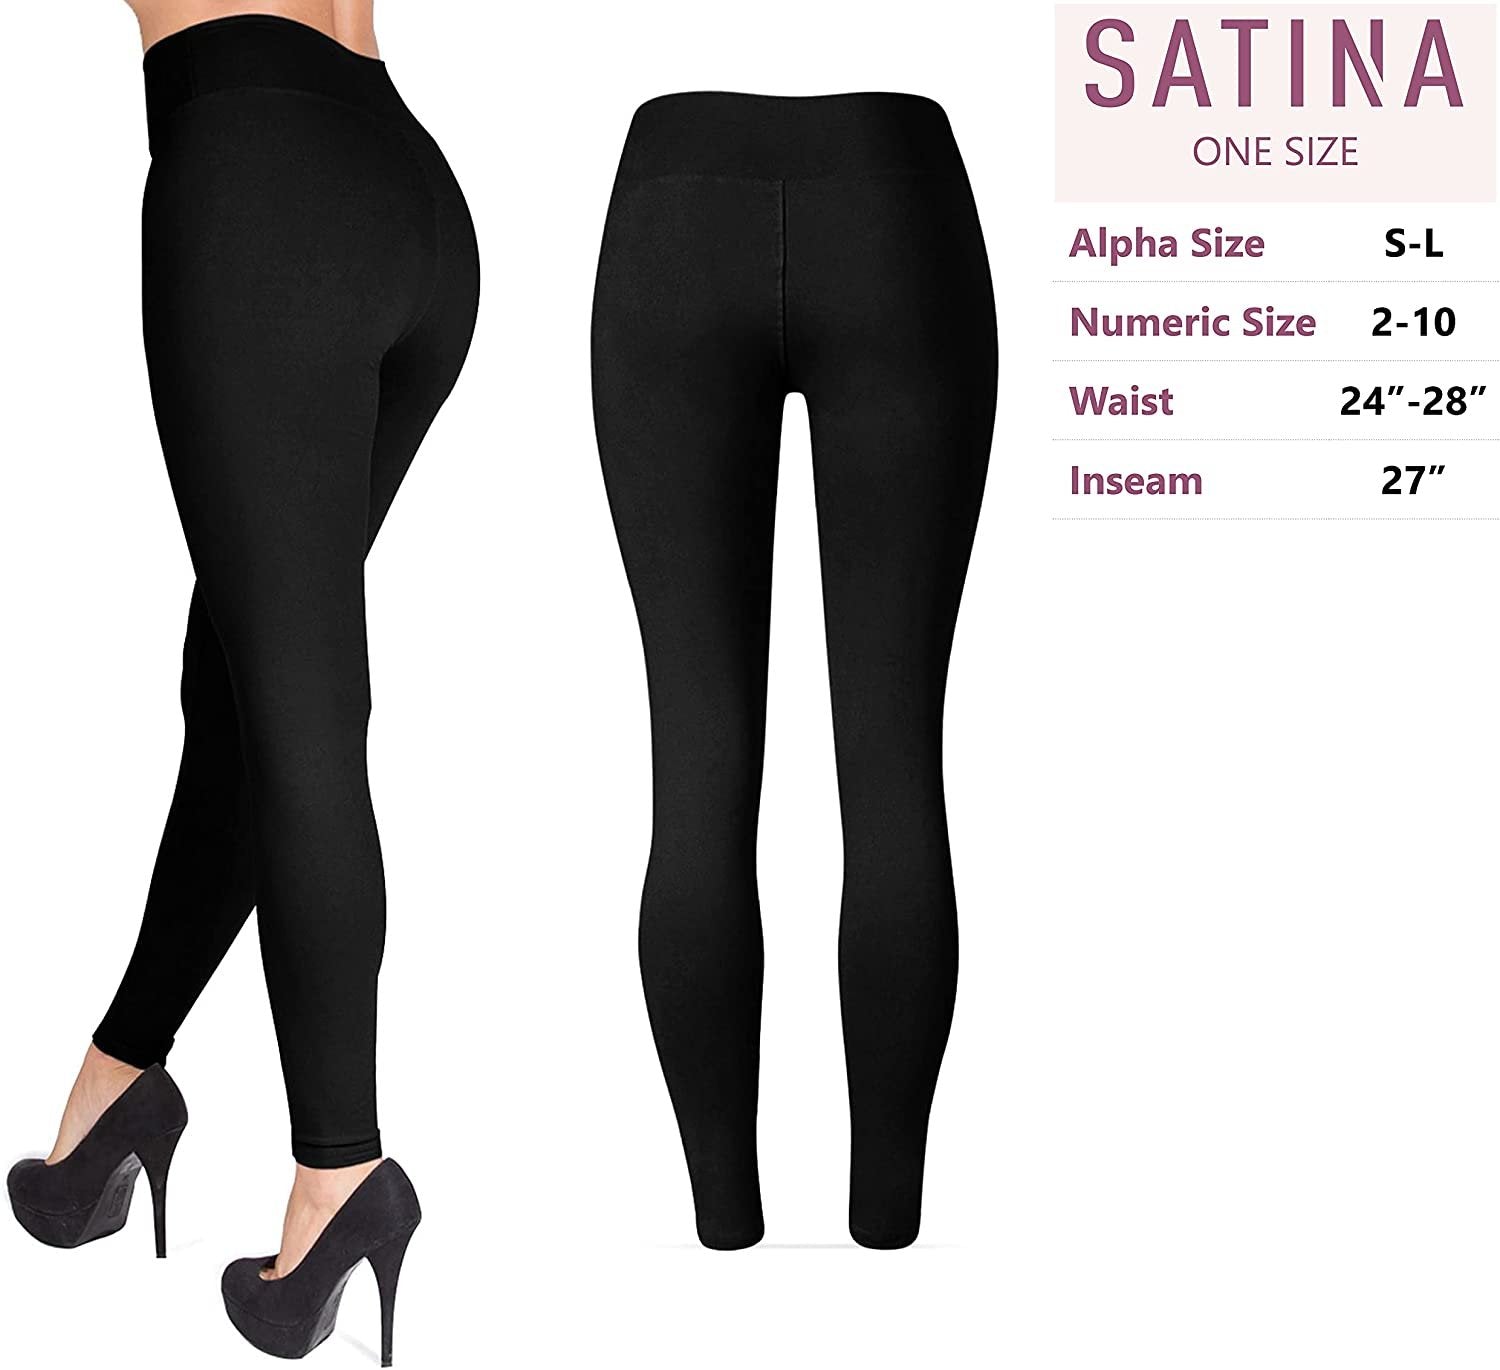 Satina High Waisted Leggings Black | 3 Inch Waistband | One Size Fits Most